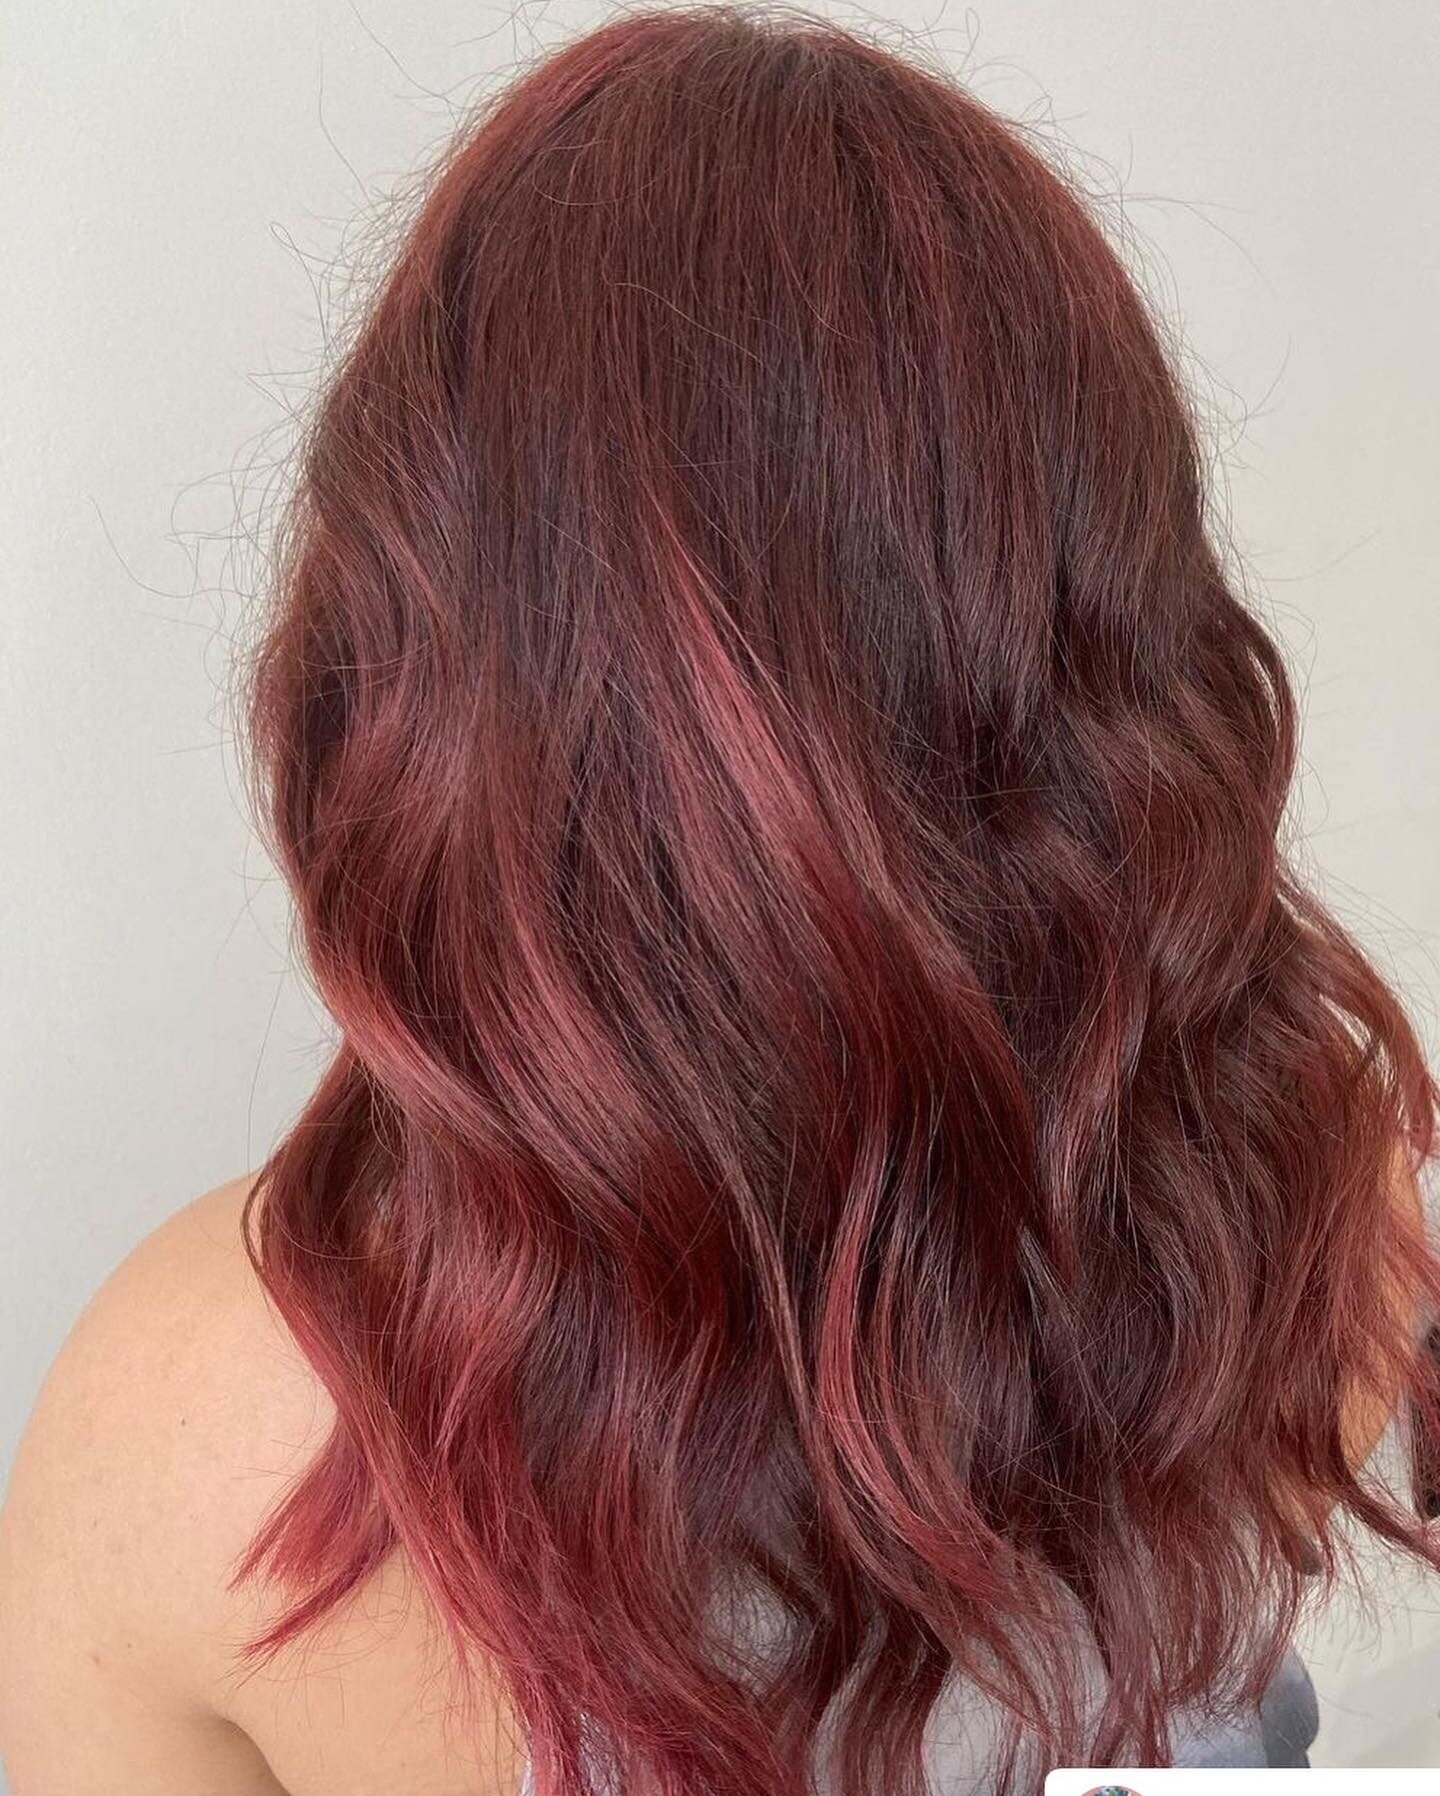 Posted @withregram &bull; @_heyykayhair I absolutely live for these quick transformations ❤️🧜&zwj;♀️ 
#redhair #fullcolor #hairstransformations #haircut #oahuhairstylist #namiesalon #namiesalonhawaii